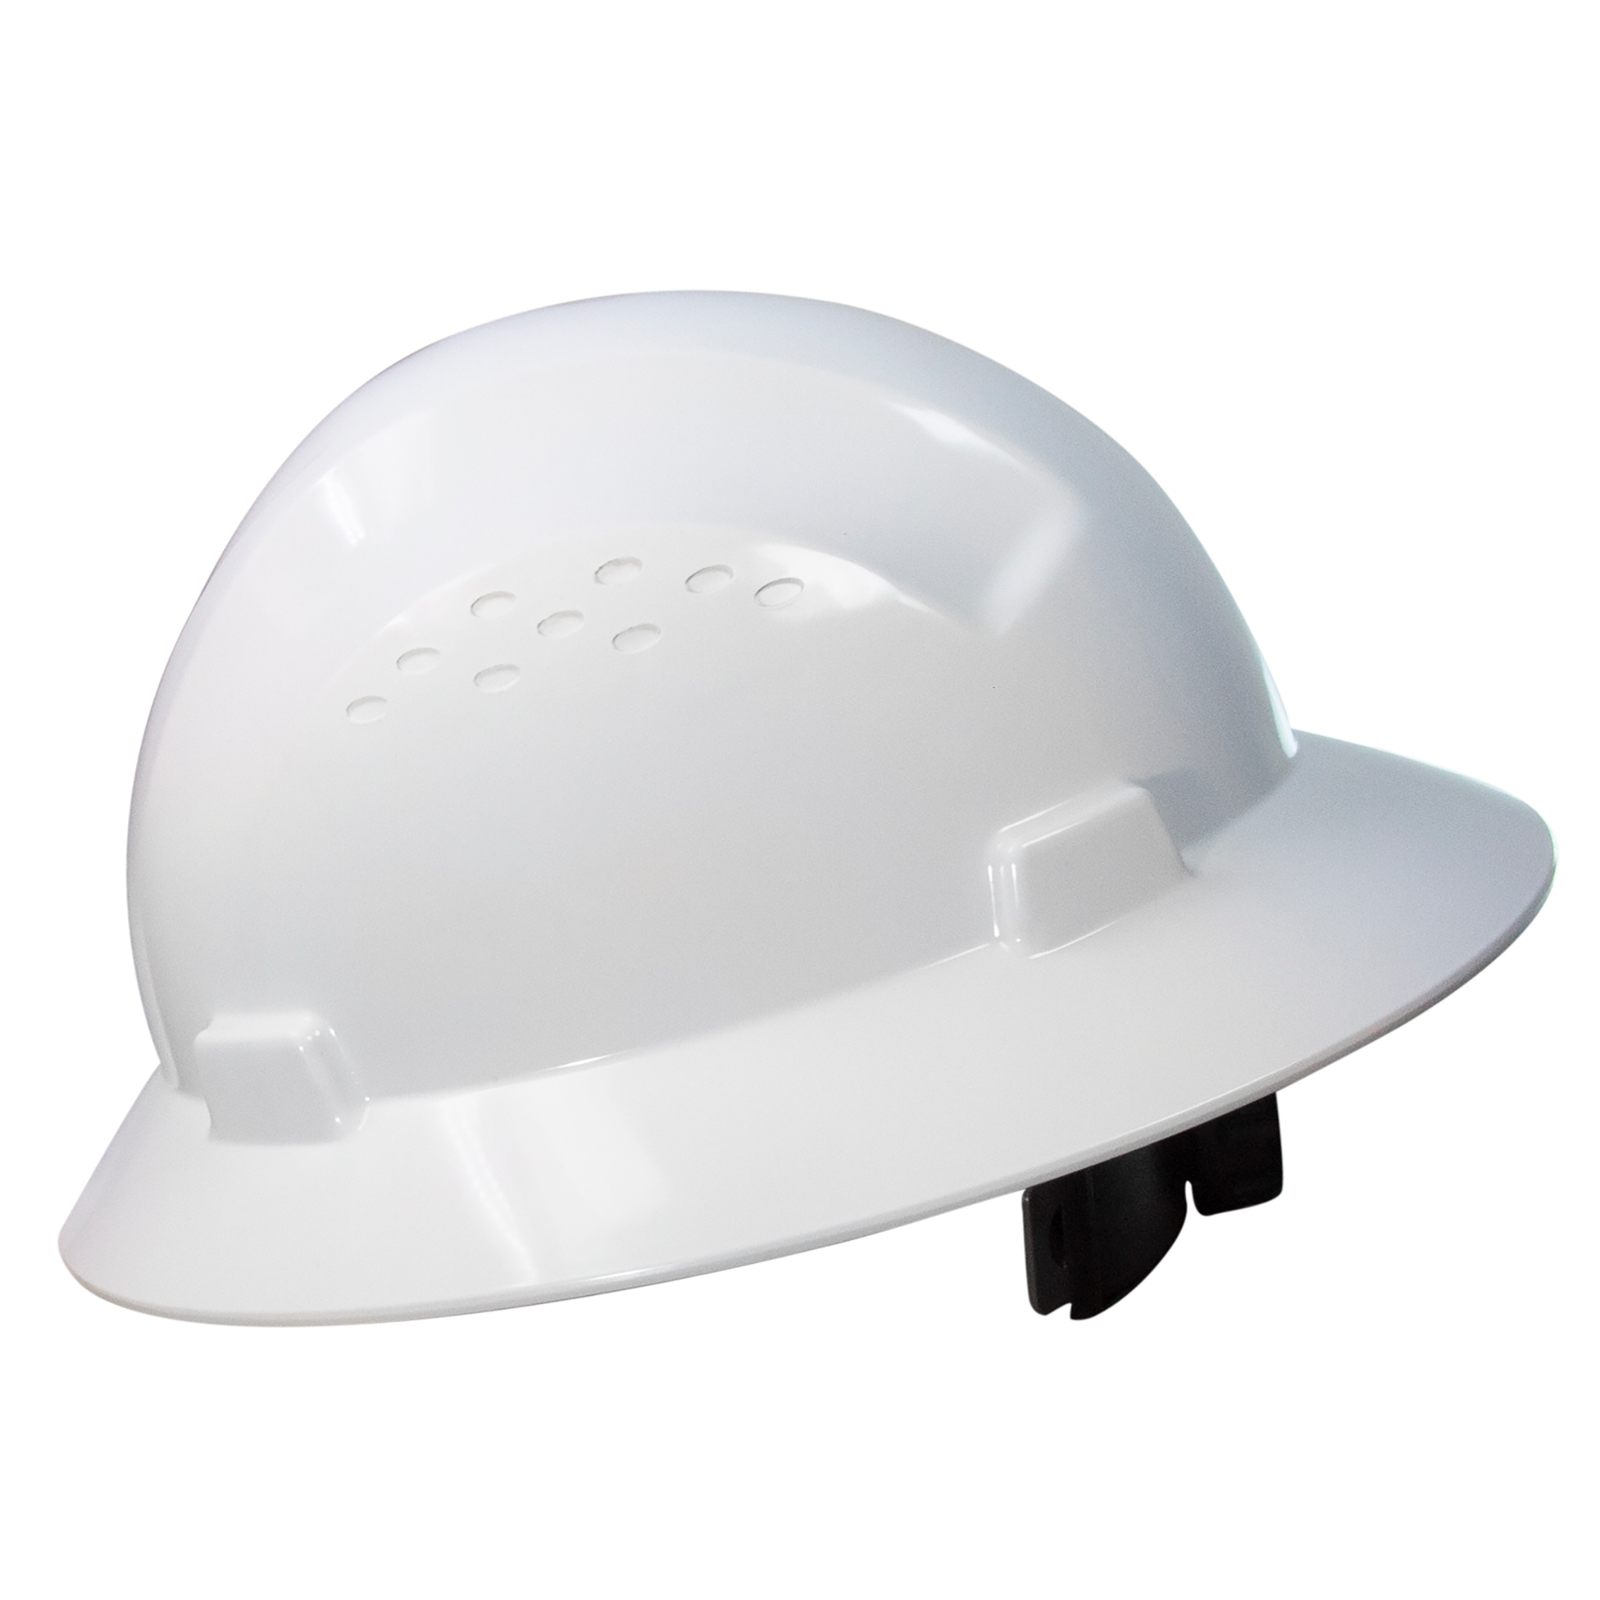 A JORESTECH full brim white safety hard hat with 4 point suspension Type I Class C, E, G